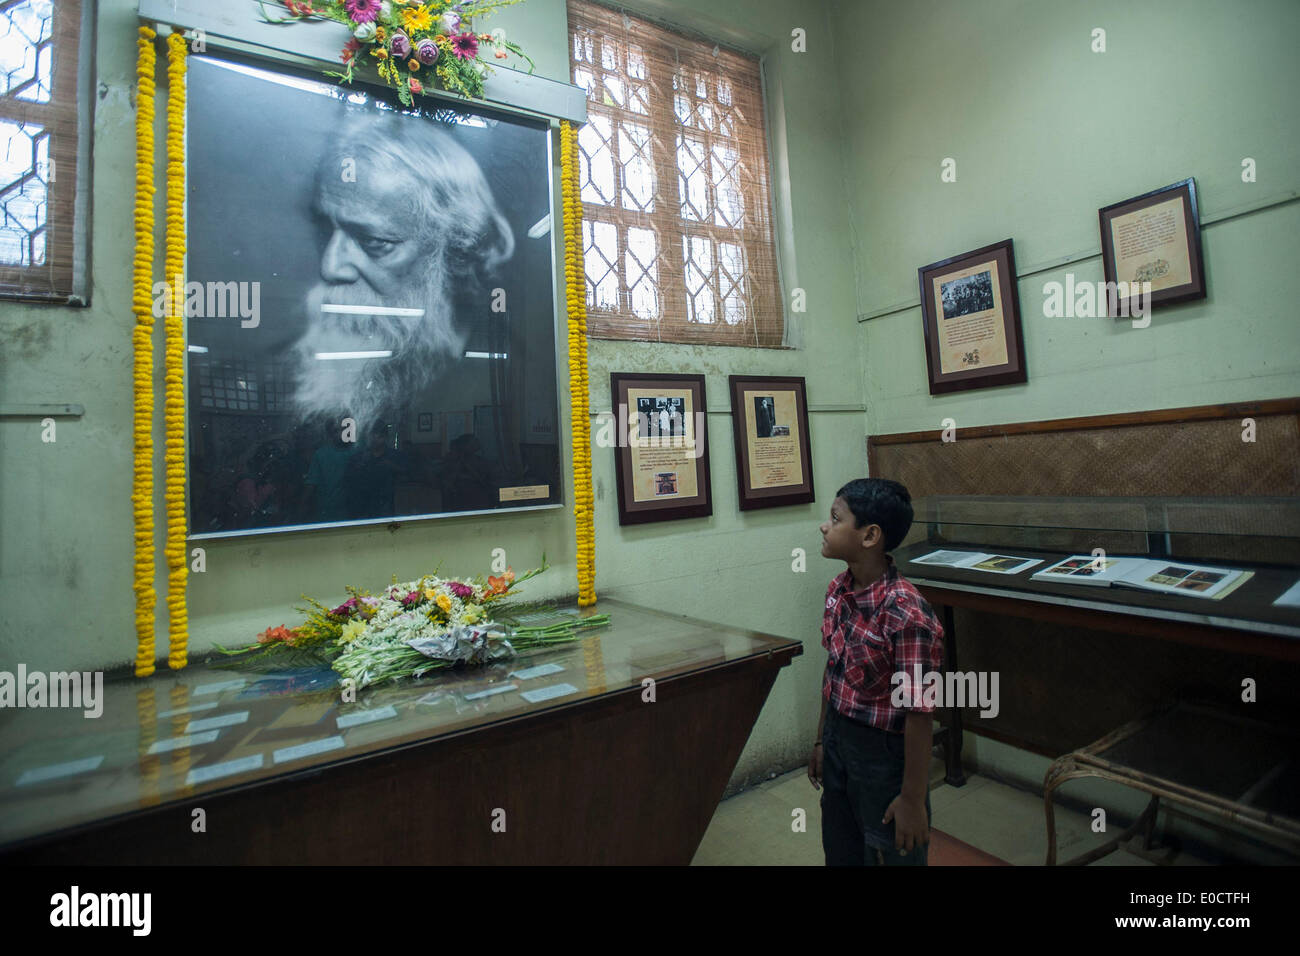 Calcutta. 9th May, 2014. A boy looks at a photo of Rabindranath Tagore in the Nobel laureate's house during a celebration of Tagore's birth anniversary in Calcutta, east of India on May 9, 2014. © Xinhua Photo/Tumpa Mondal/Xinhua/Alamy Live News Stock Photo